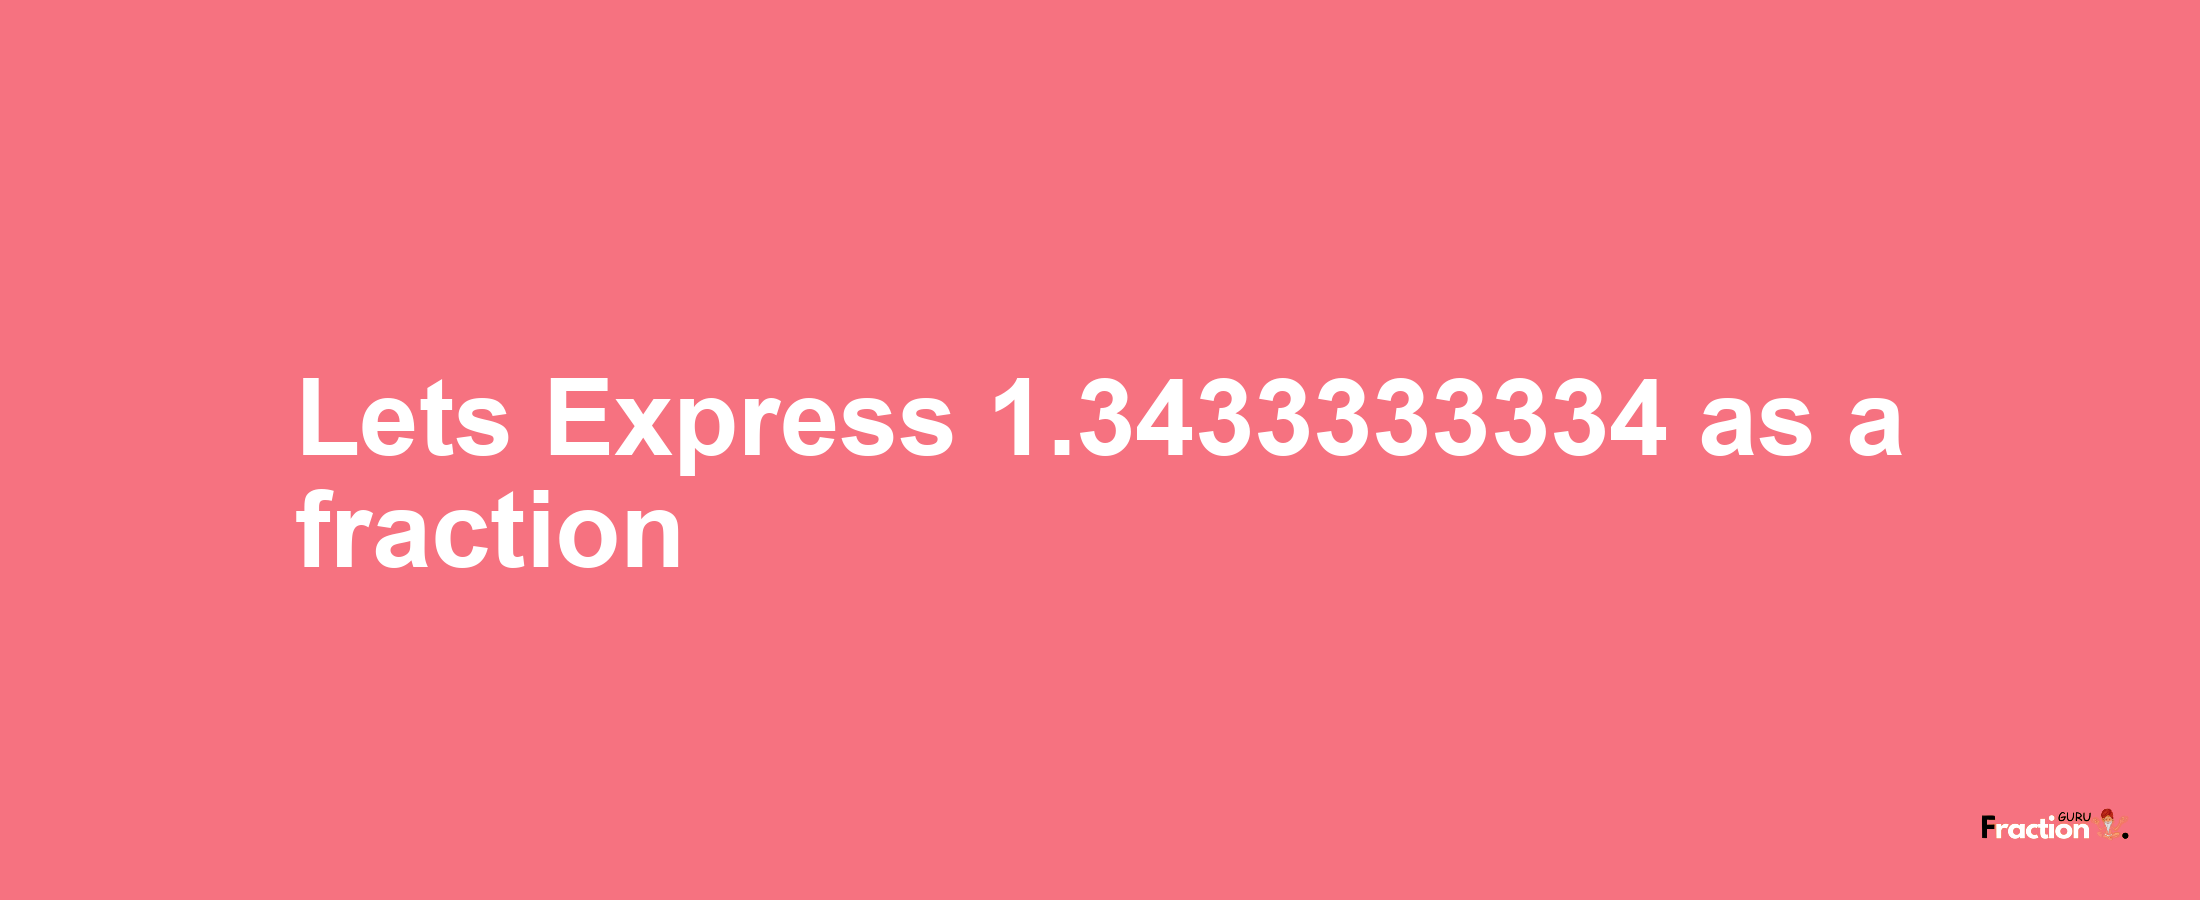 Lets Express 1.3433333334 as afraction